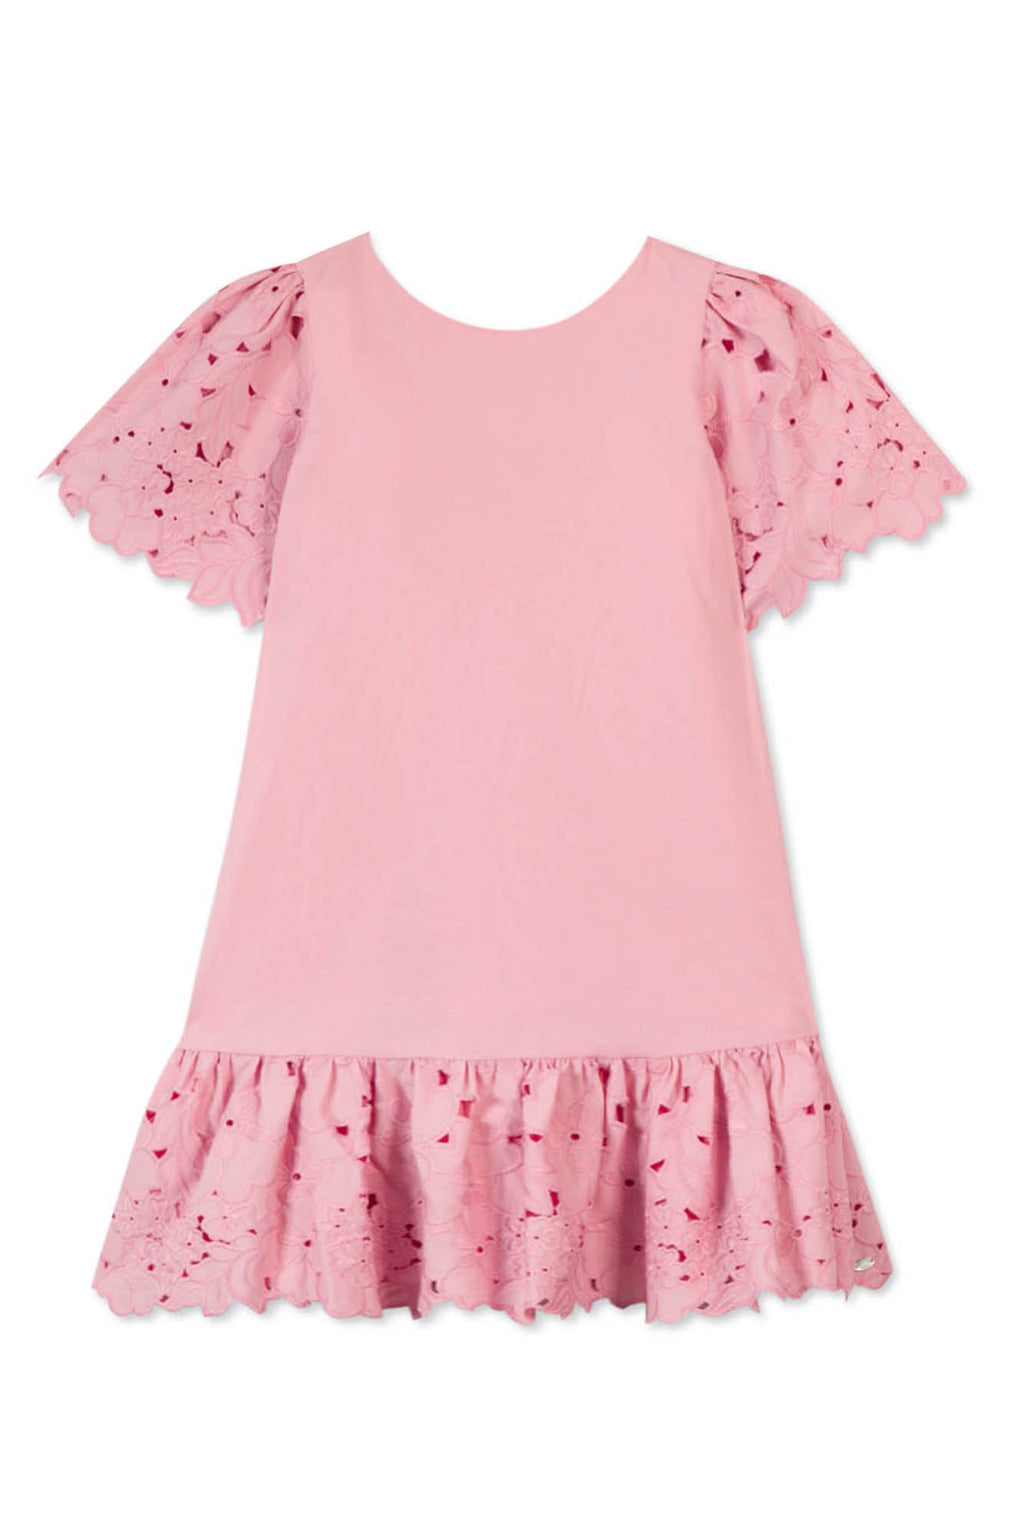 Robe - Rose broderies coton